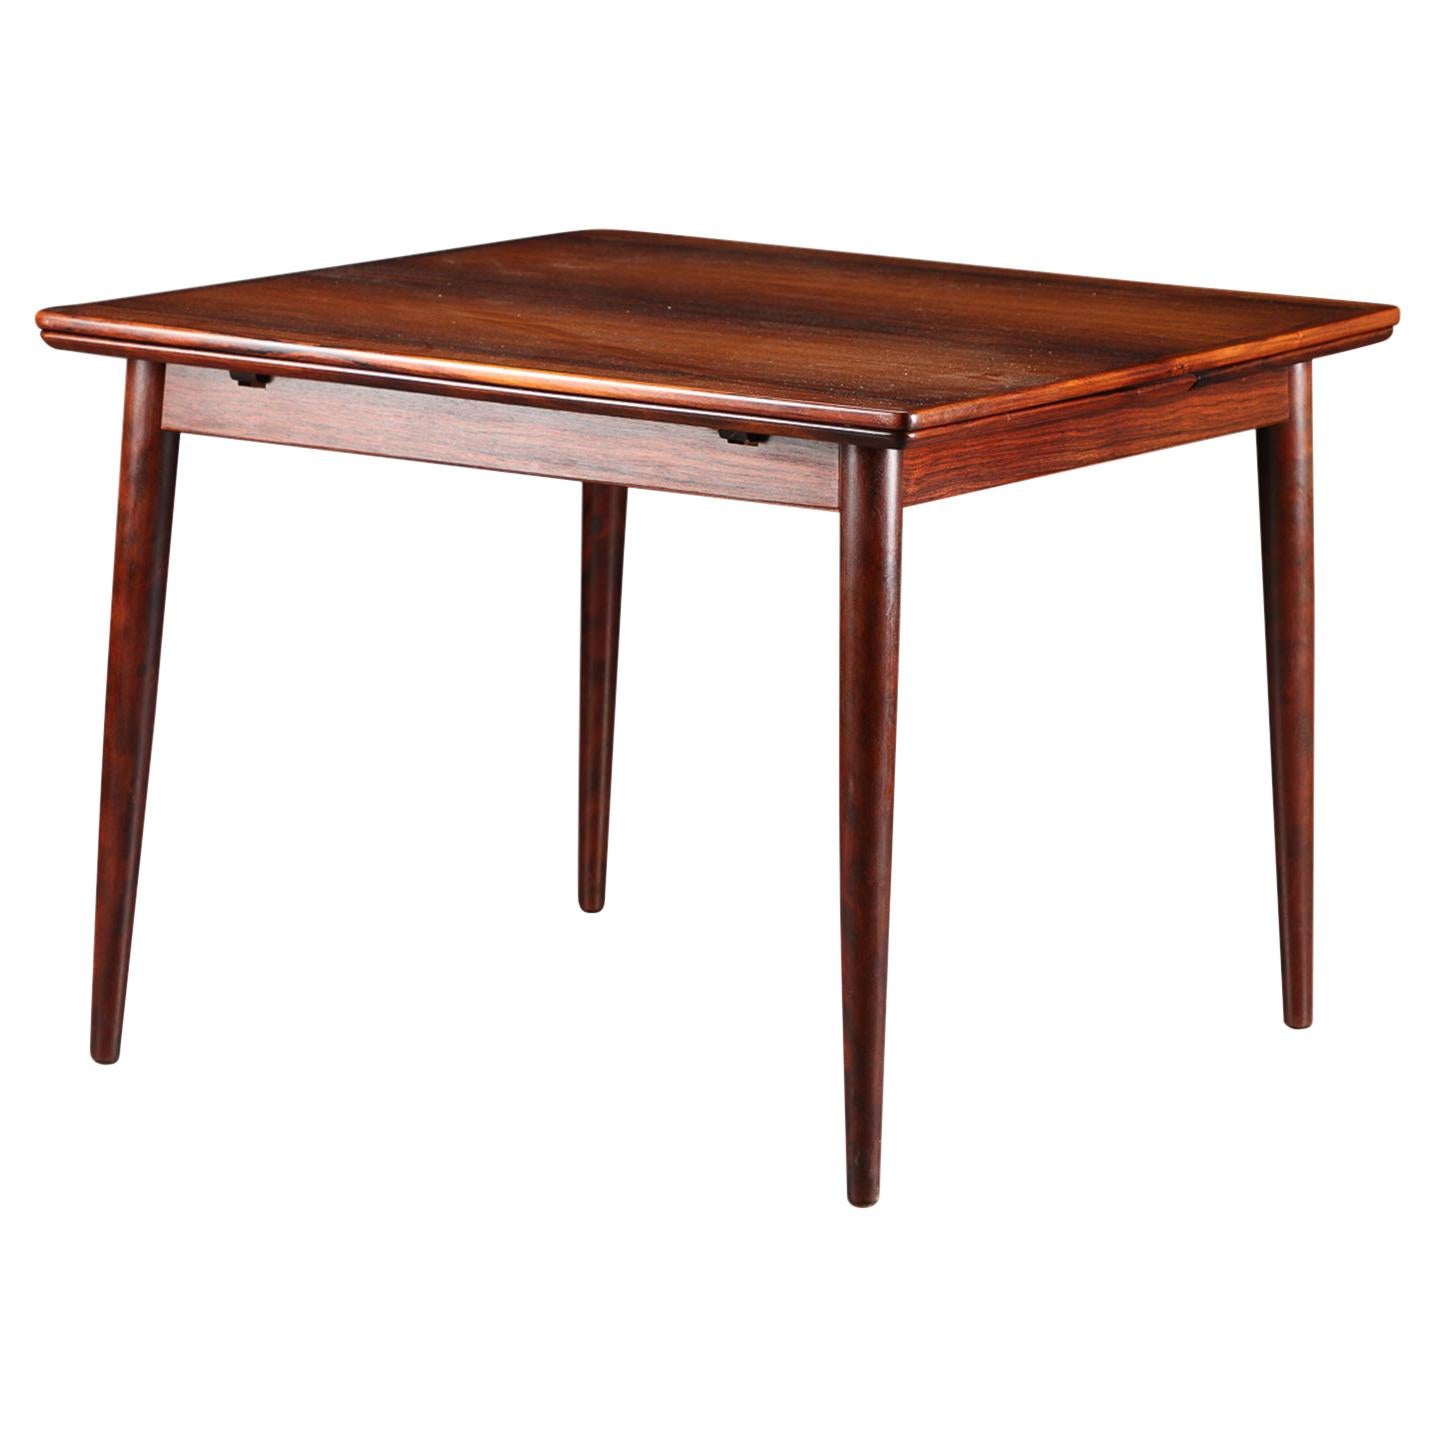 Square Danish Modern Draw Leaf Dining Table in Rosewood